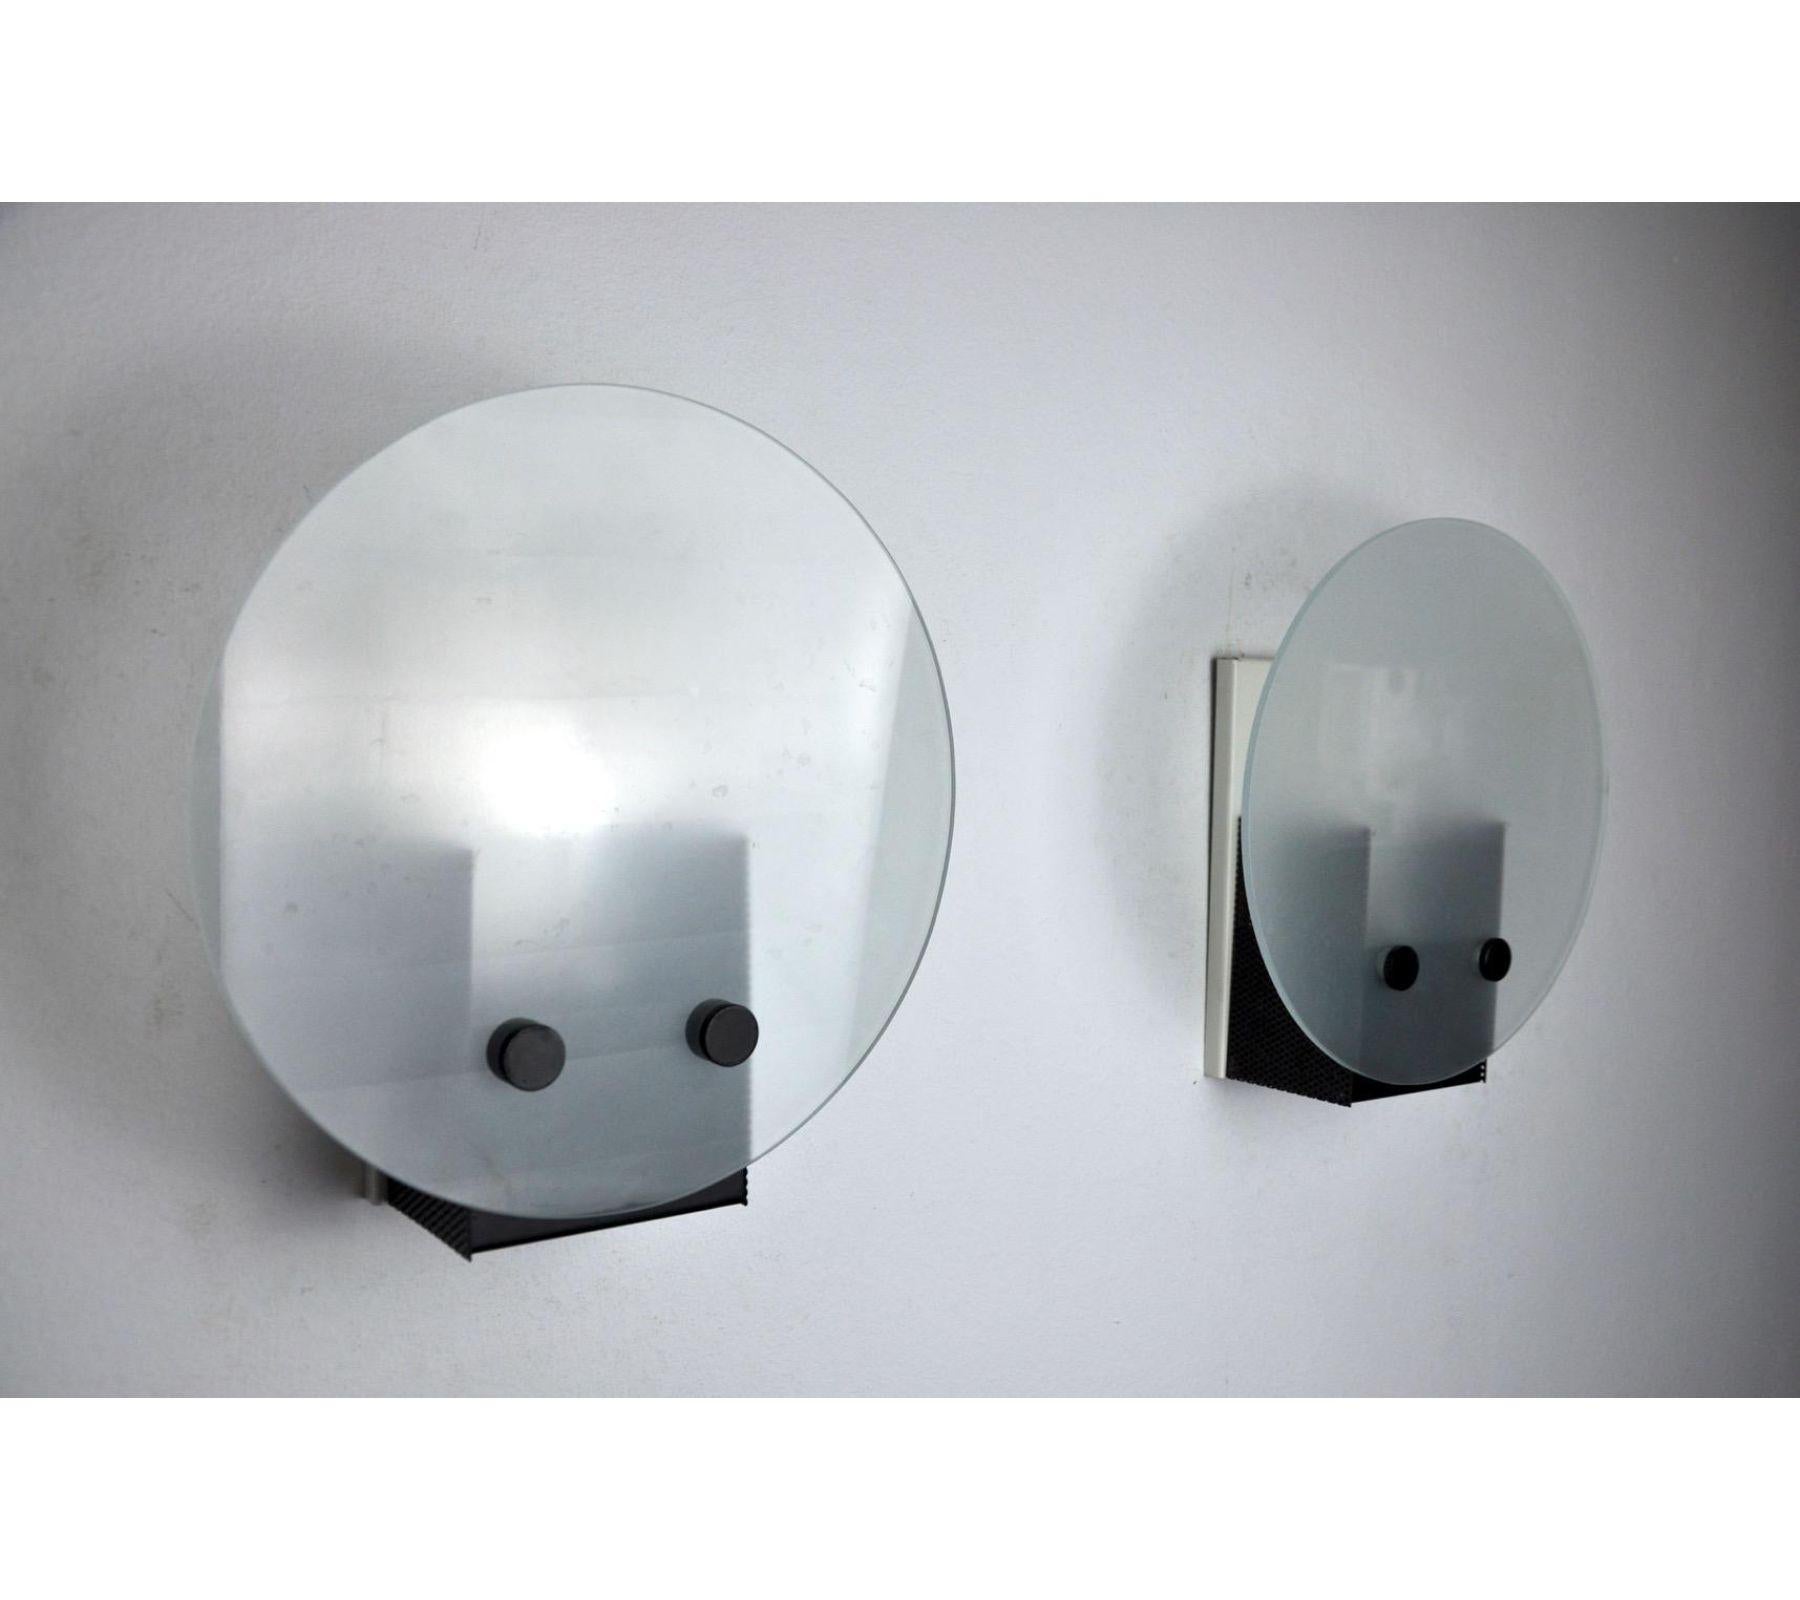 Very pair of wall lamps in the memphis style, designated and produced in spain in the 1970s. Smoked glass and metal structure. Unique object that will illuminate and bring a real design touch to your interior. Electricity verified, time mark